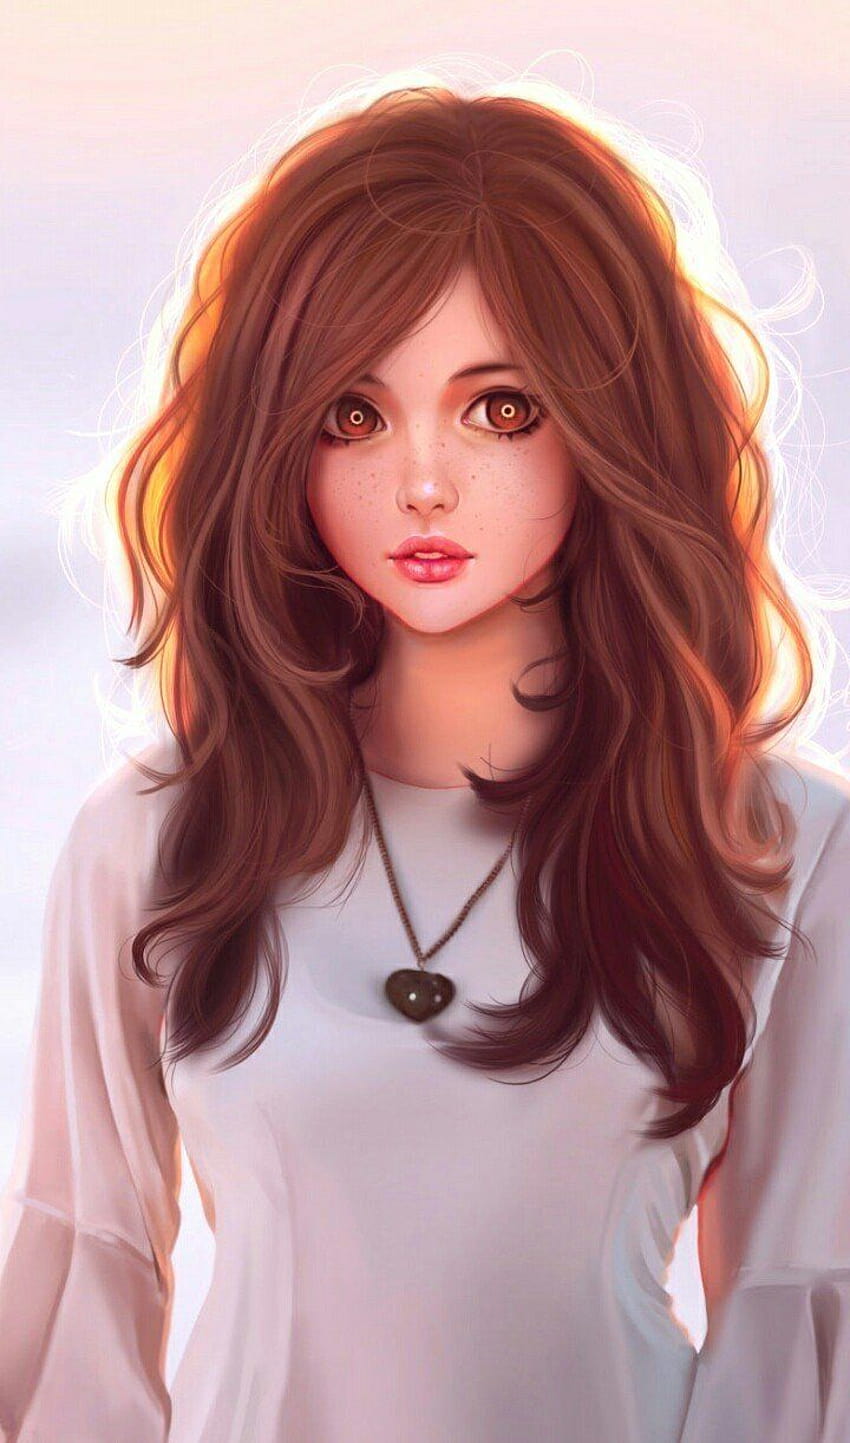 Astonishing Collection of Full 4K Beautiful Cartoon Girl Images – Top 999+